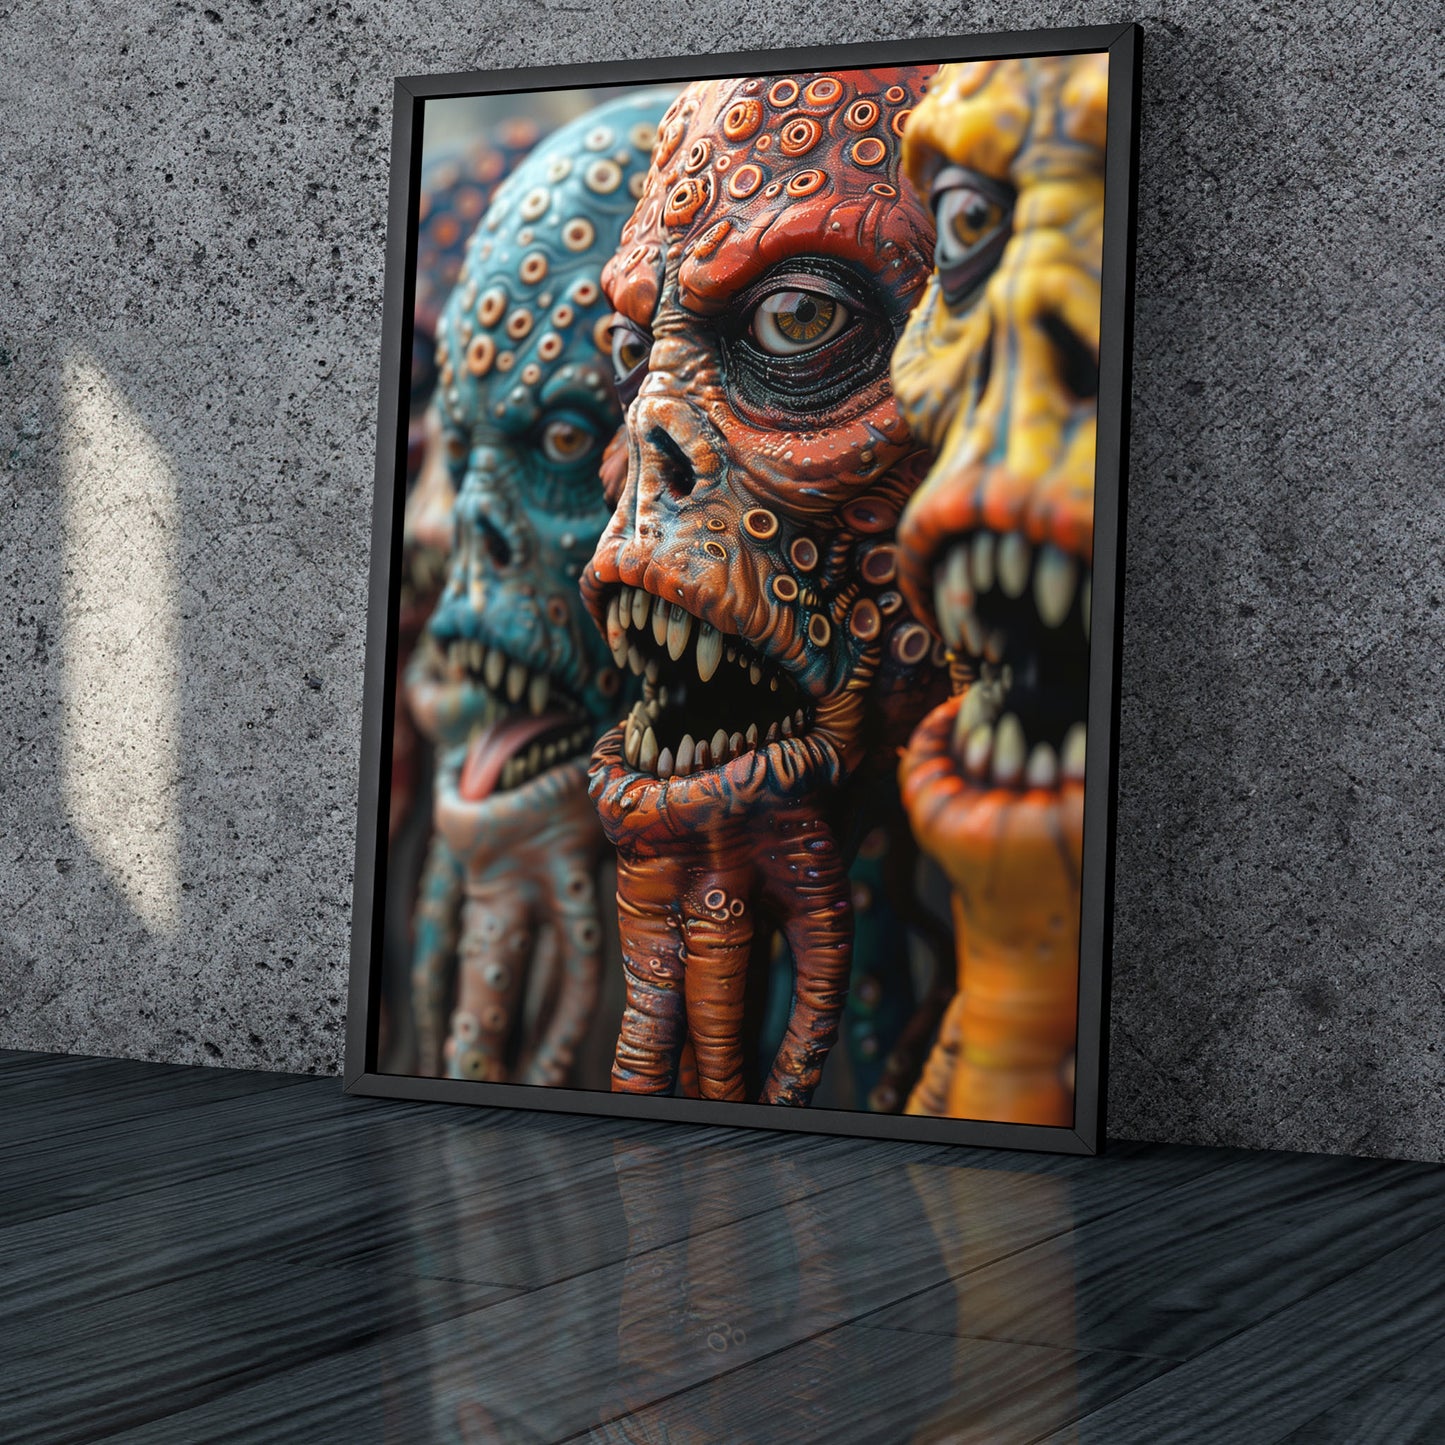 Creepy Wall Art Print featuring Colorful Monster Heads